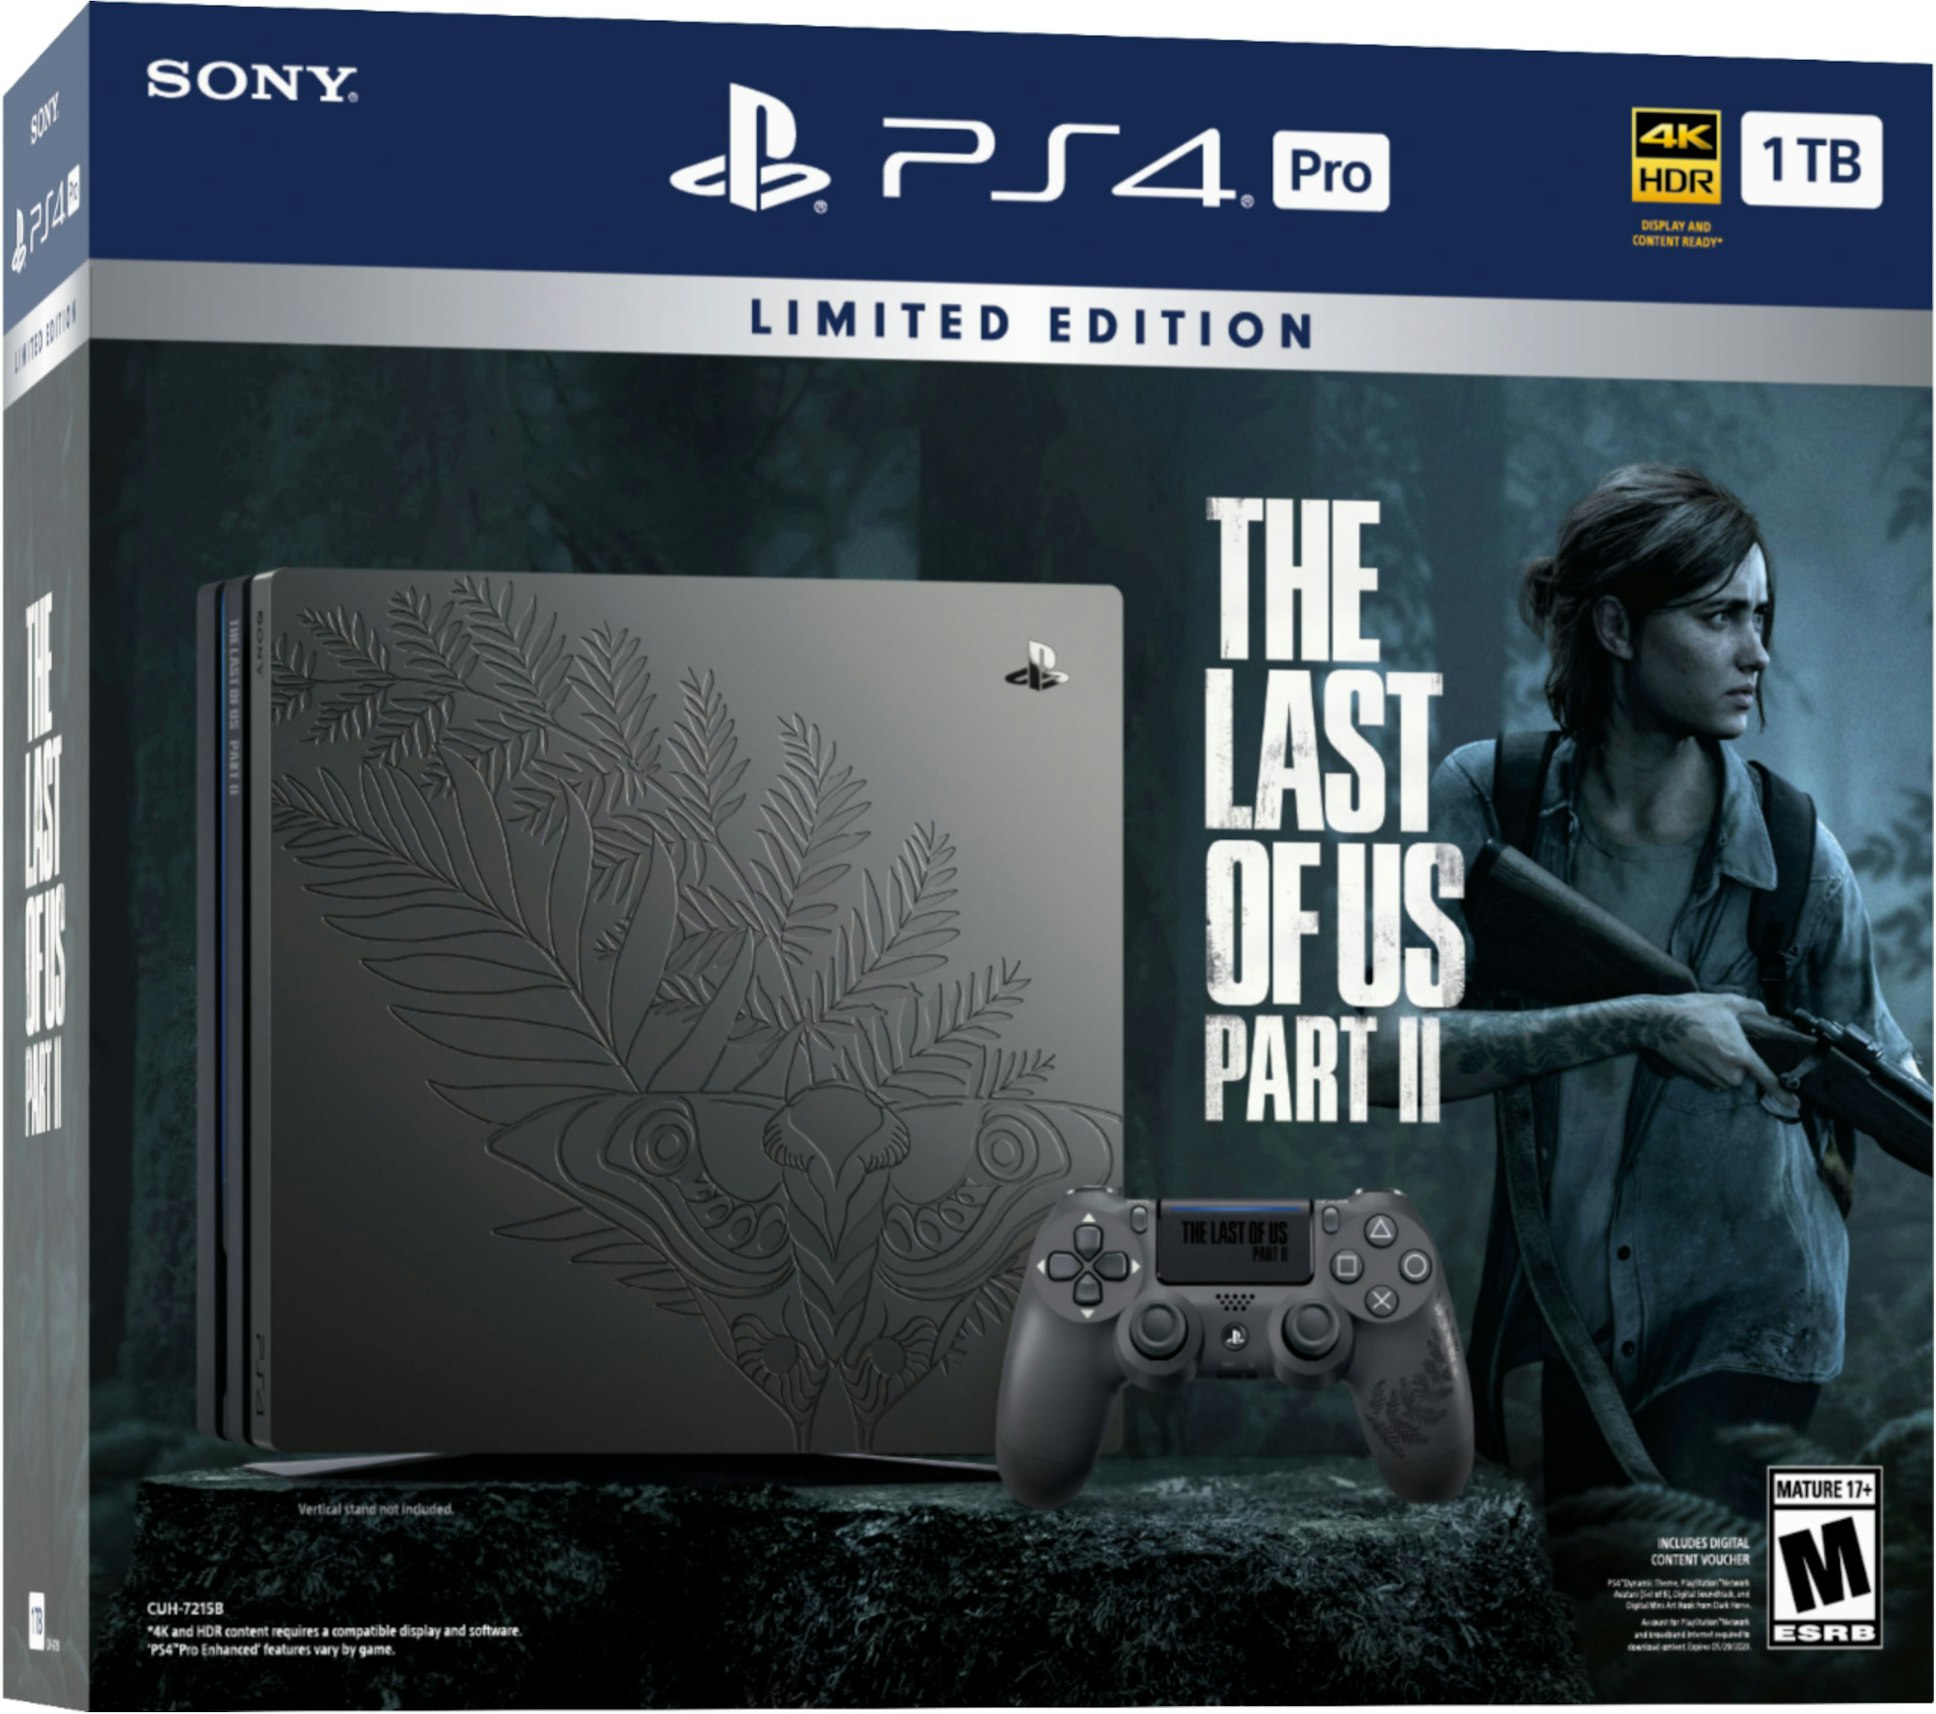 Sony PS4 Playstation 4 Pro 1TB The Last of Us Part 2 Limited Edition Console 3004136 - US